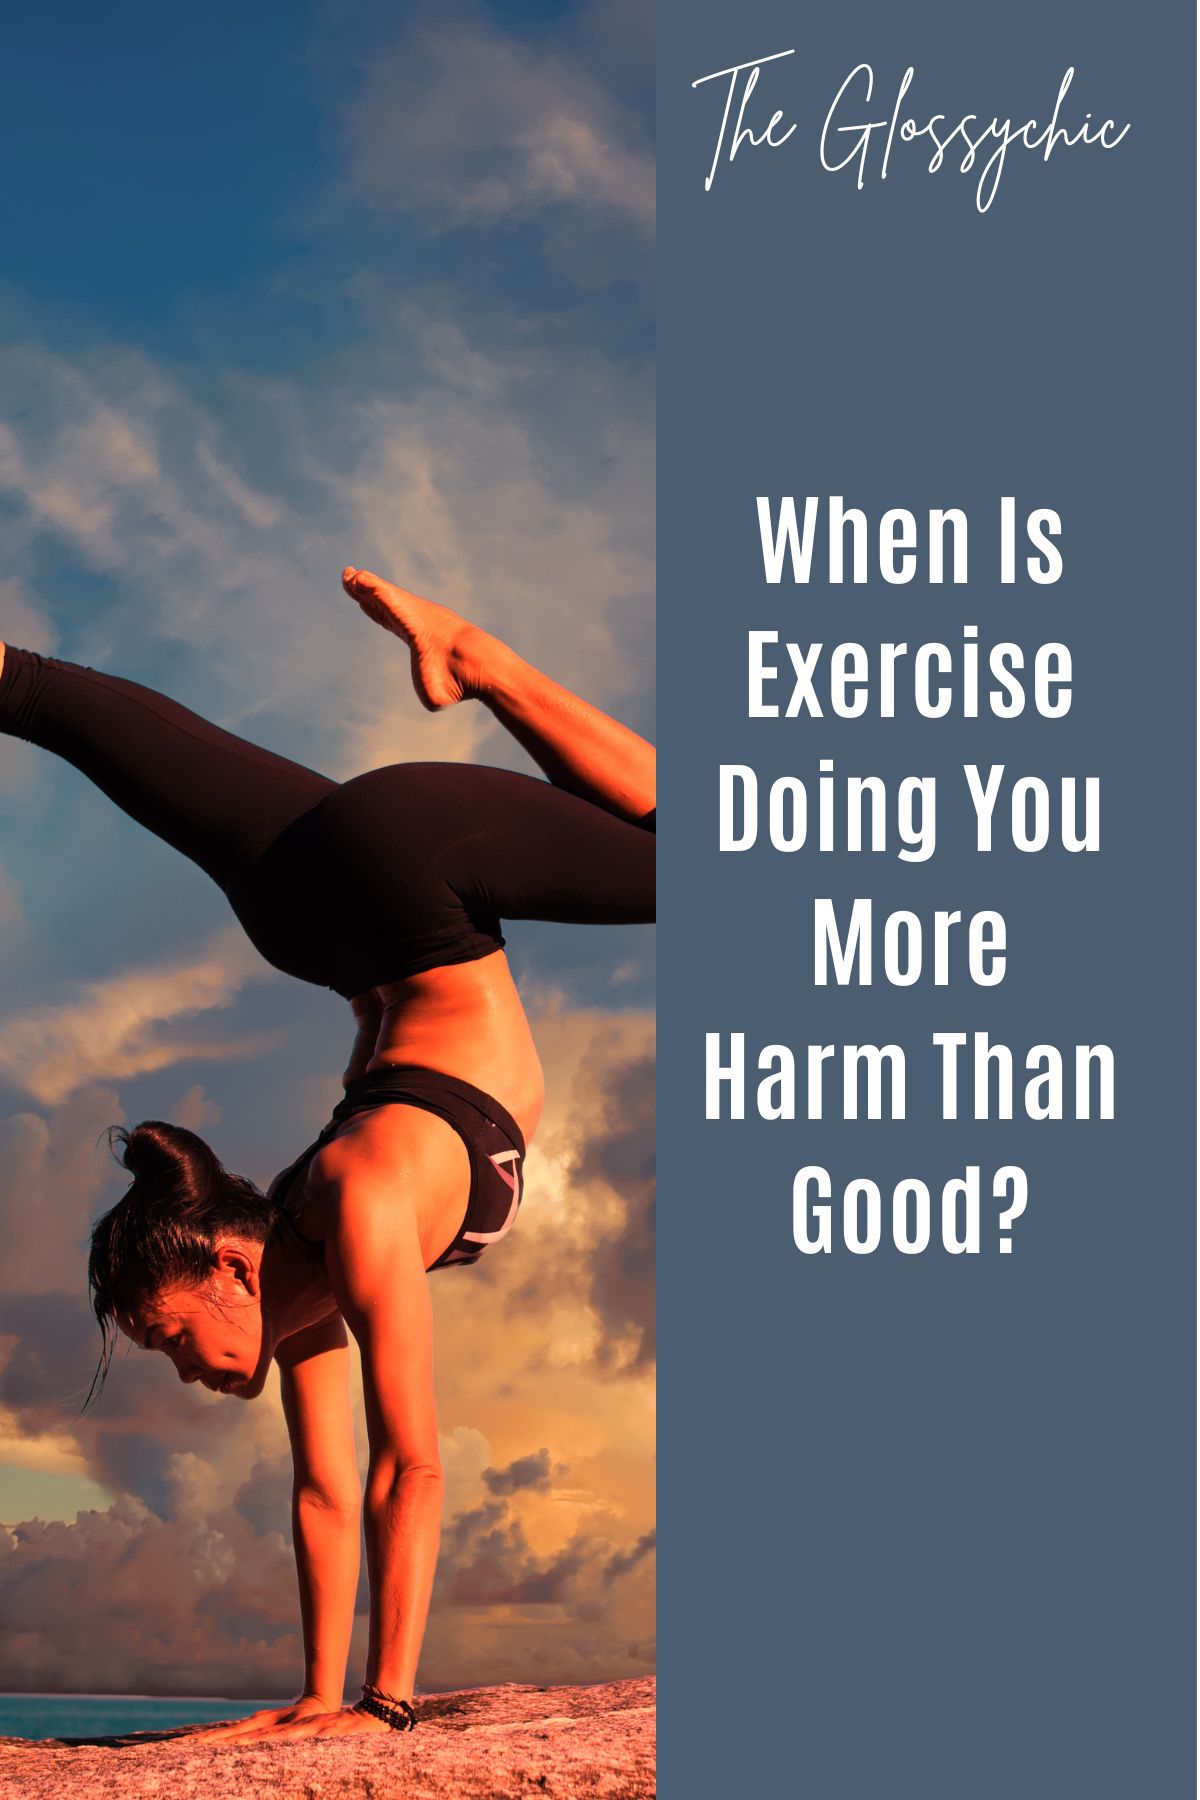 When Is Exercise Doing You More Harm Than Good?